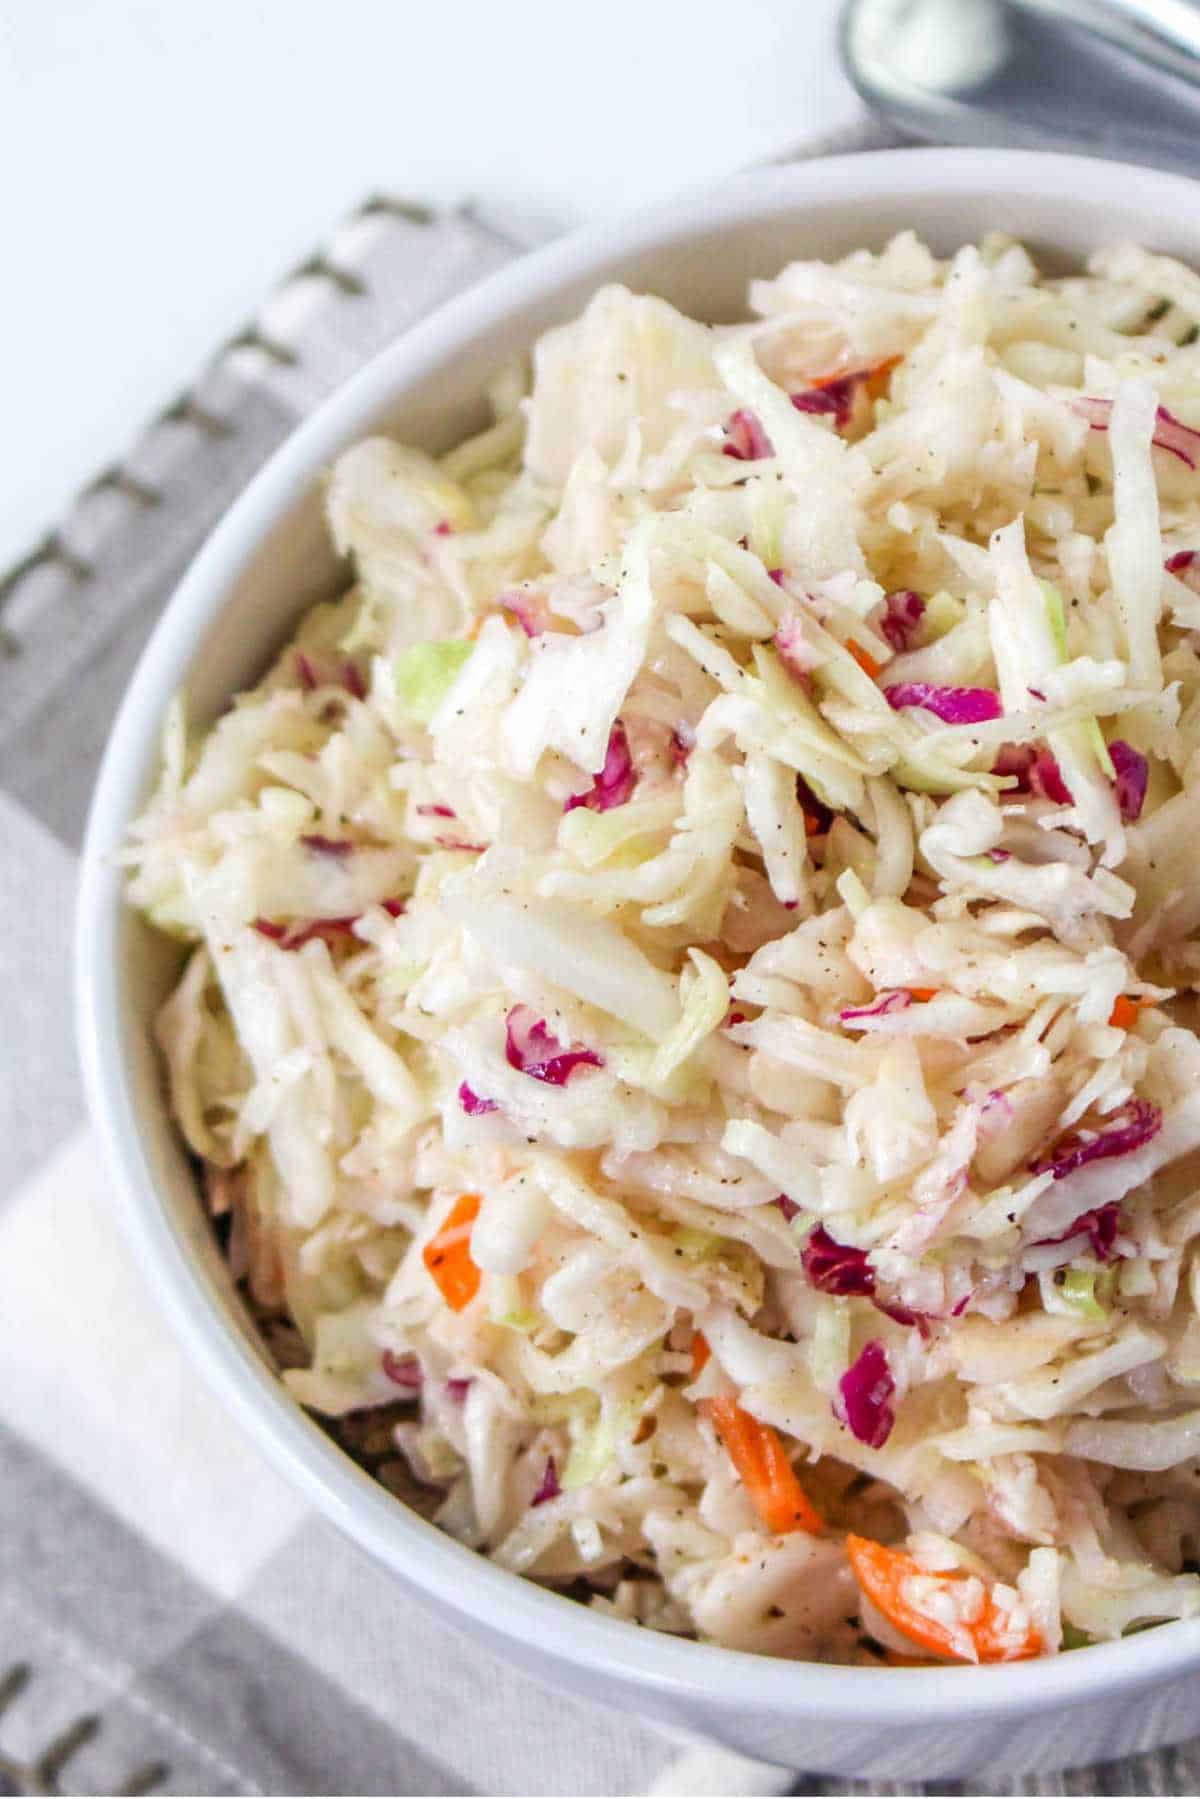 serving bowl of no mayonnaise coleslaw, Amish style.